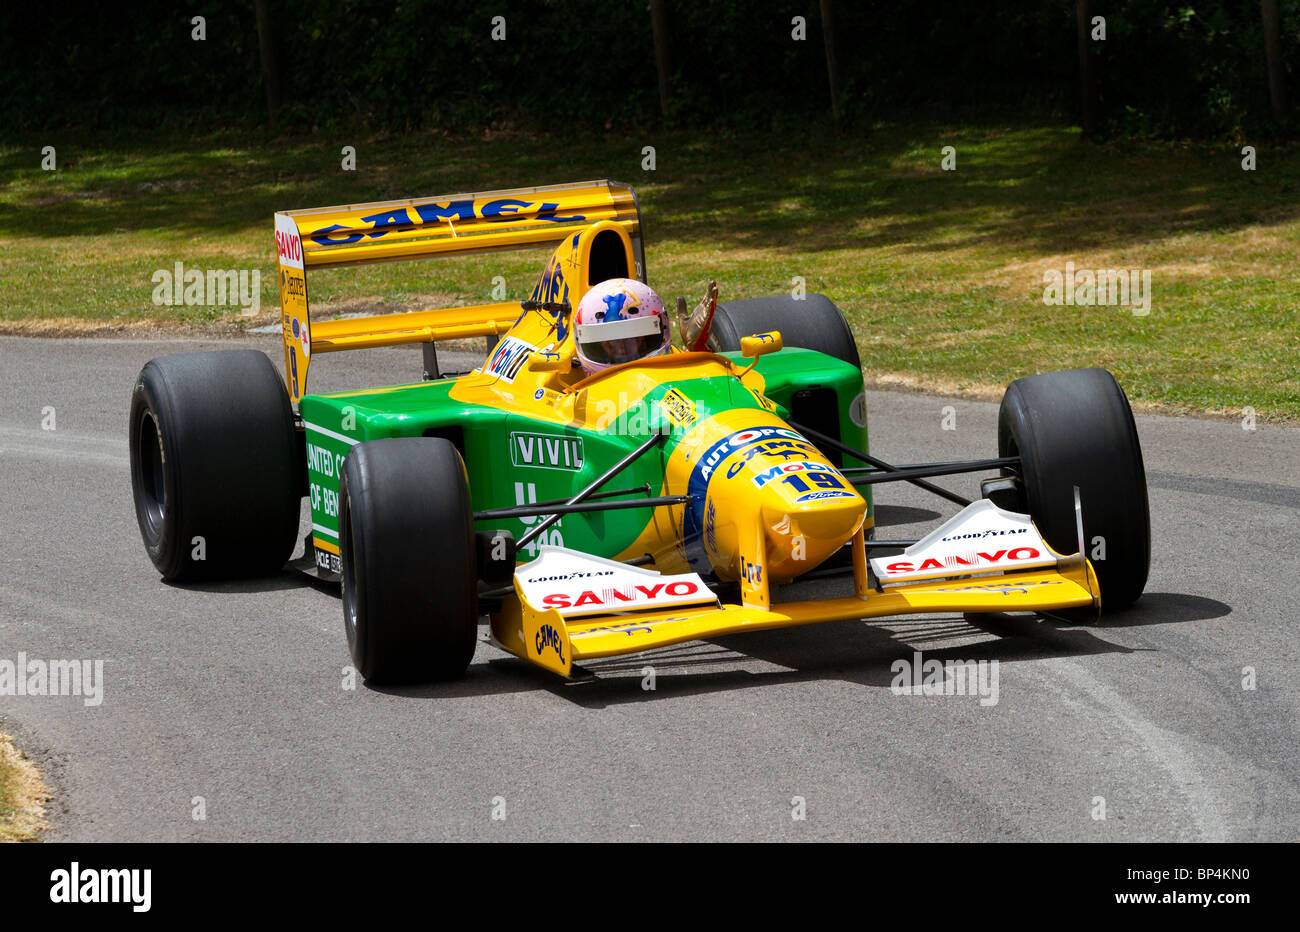 1992 Benetton-Ford B192 F1 car on the hillclimb at the 2010 Goodwood Festival of Speed, Sussex, UK. Driver: Lorina McLaughlin Stock Photo